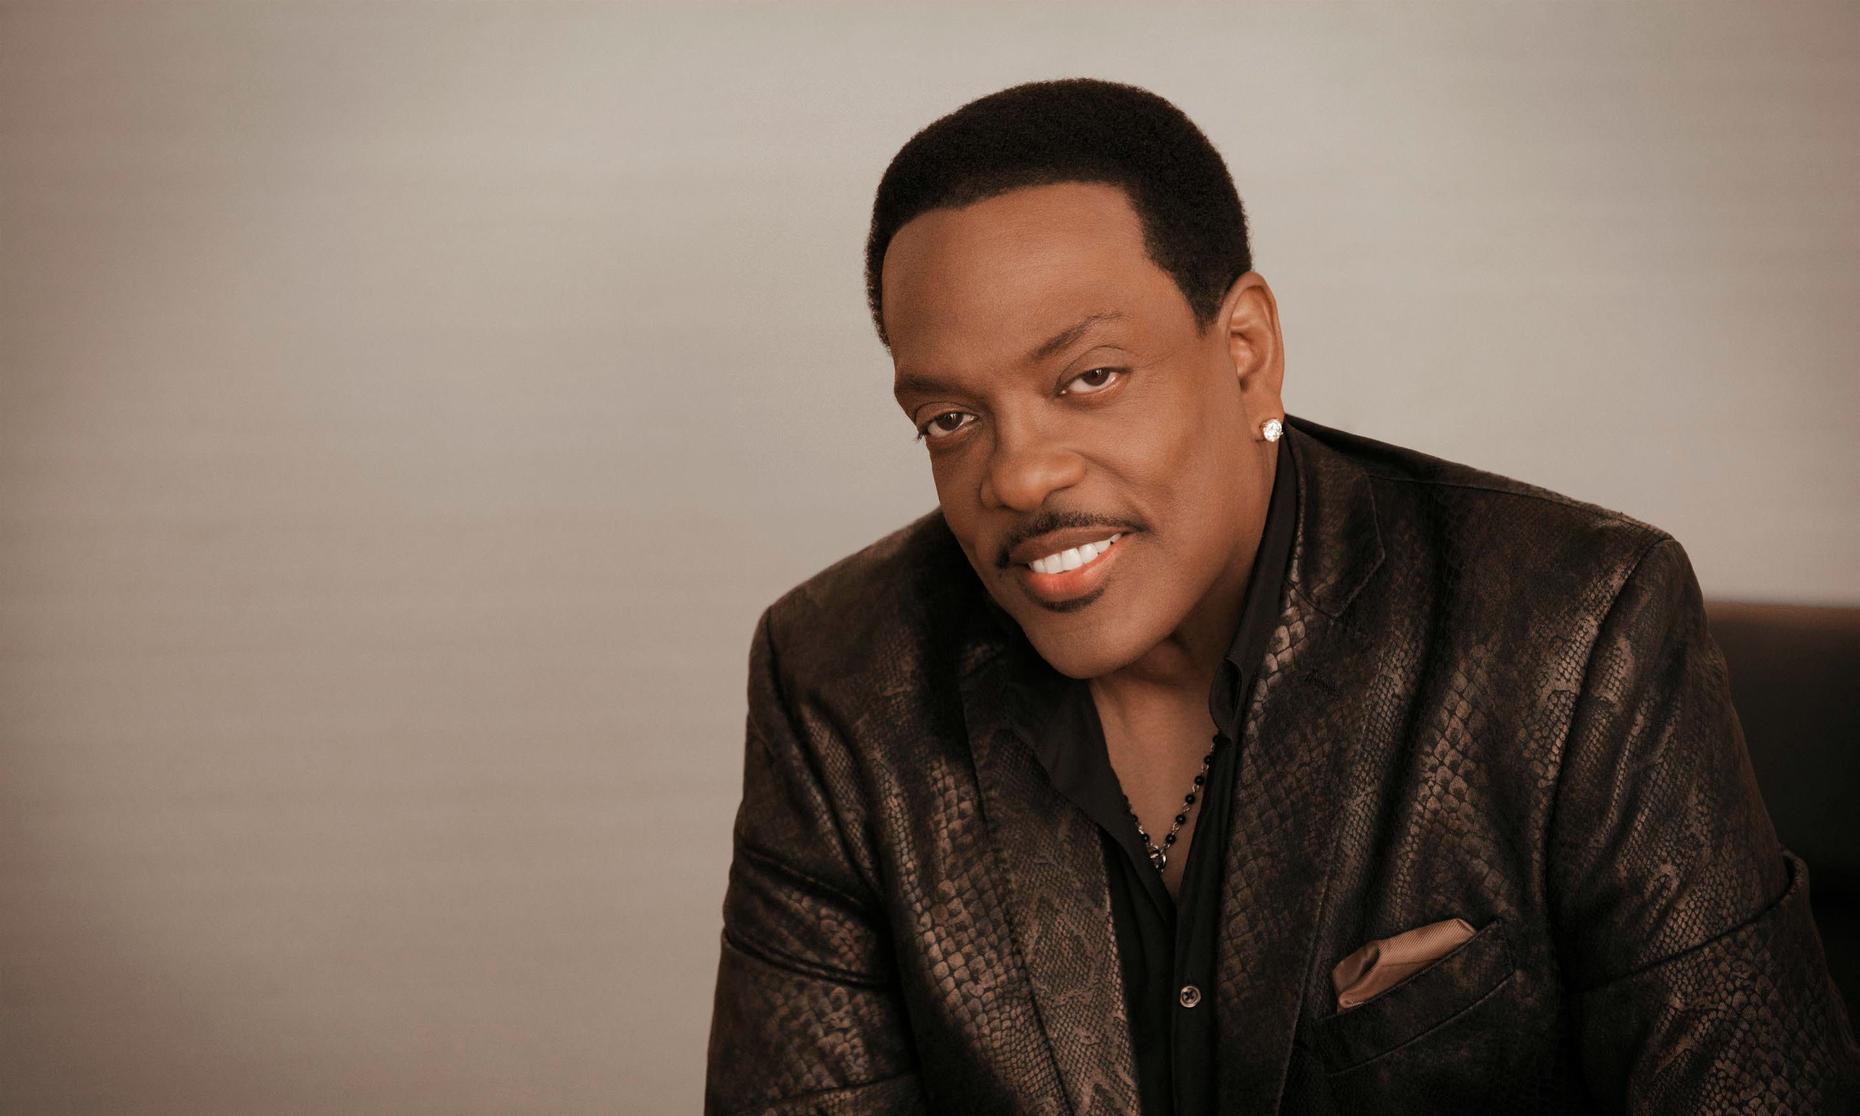 The Rise and Fall and Rise of Charlie Wilson, Studio 360